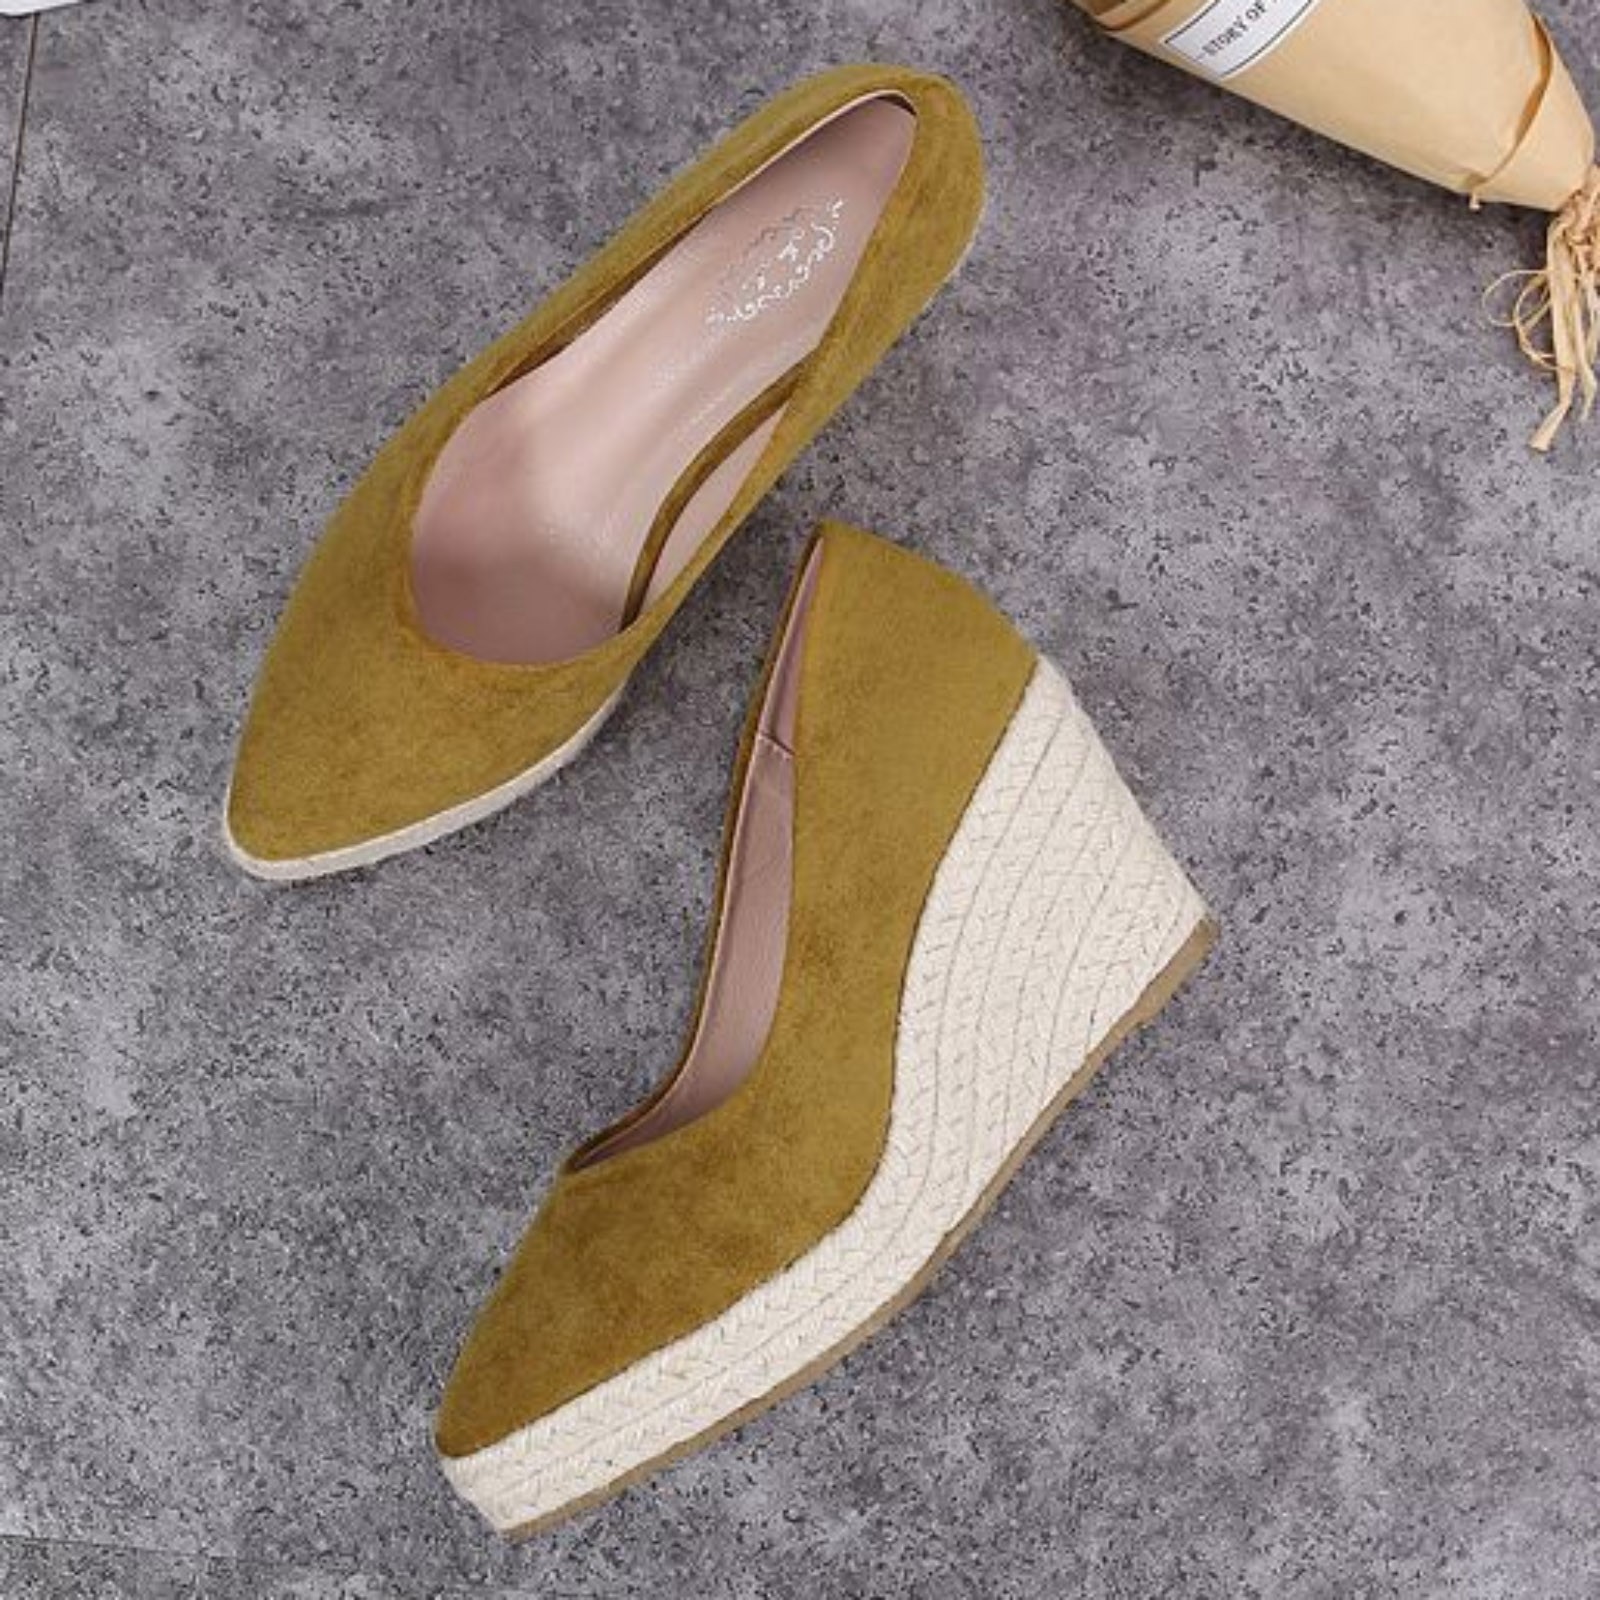 Fisherman Shoes Female Grass Woven Wedge Heel New Spring Autumn Woven ...